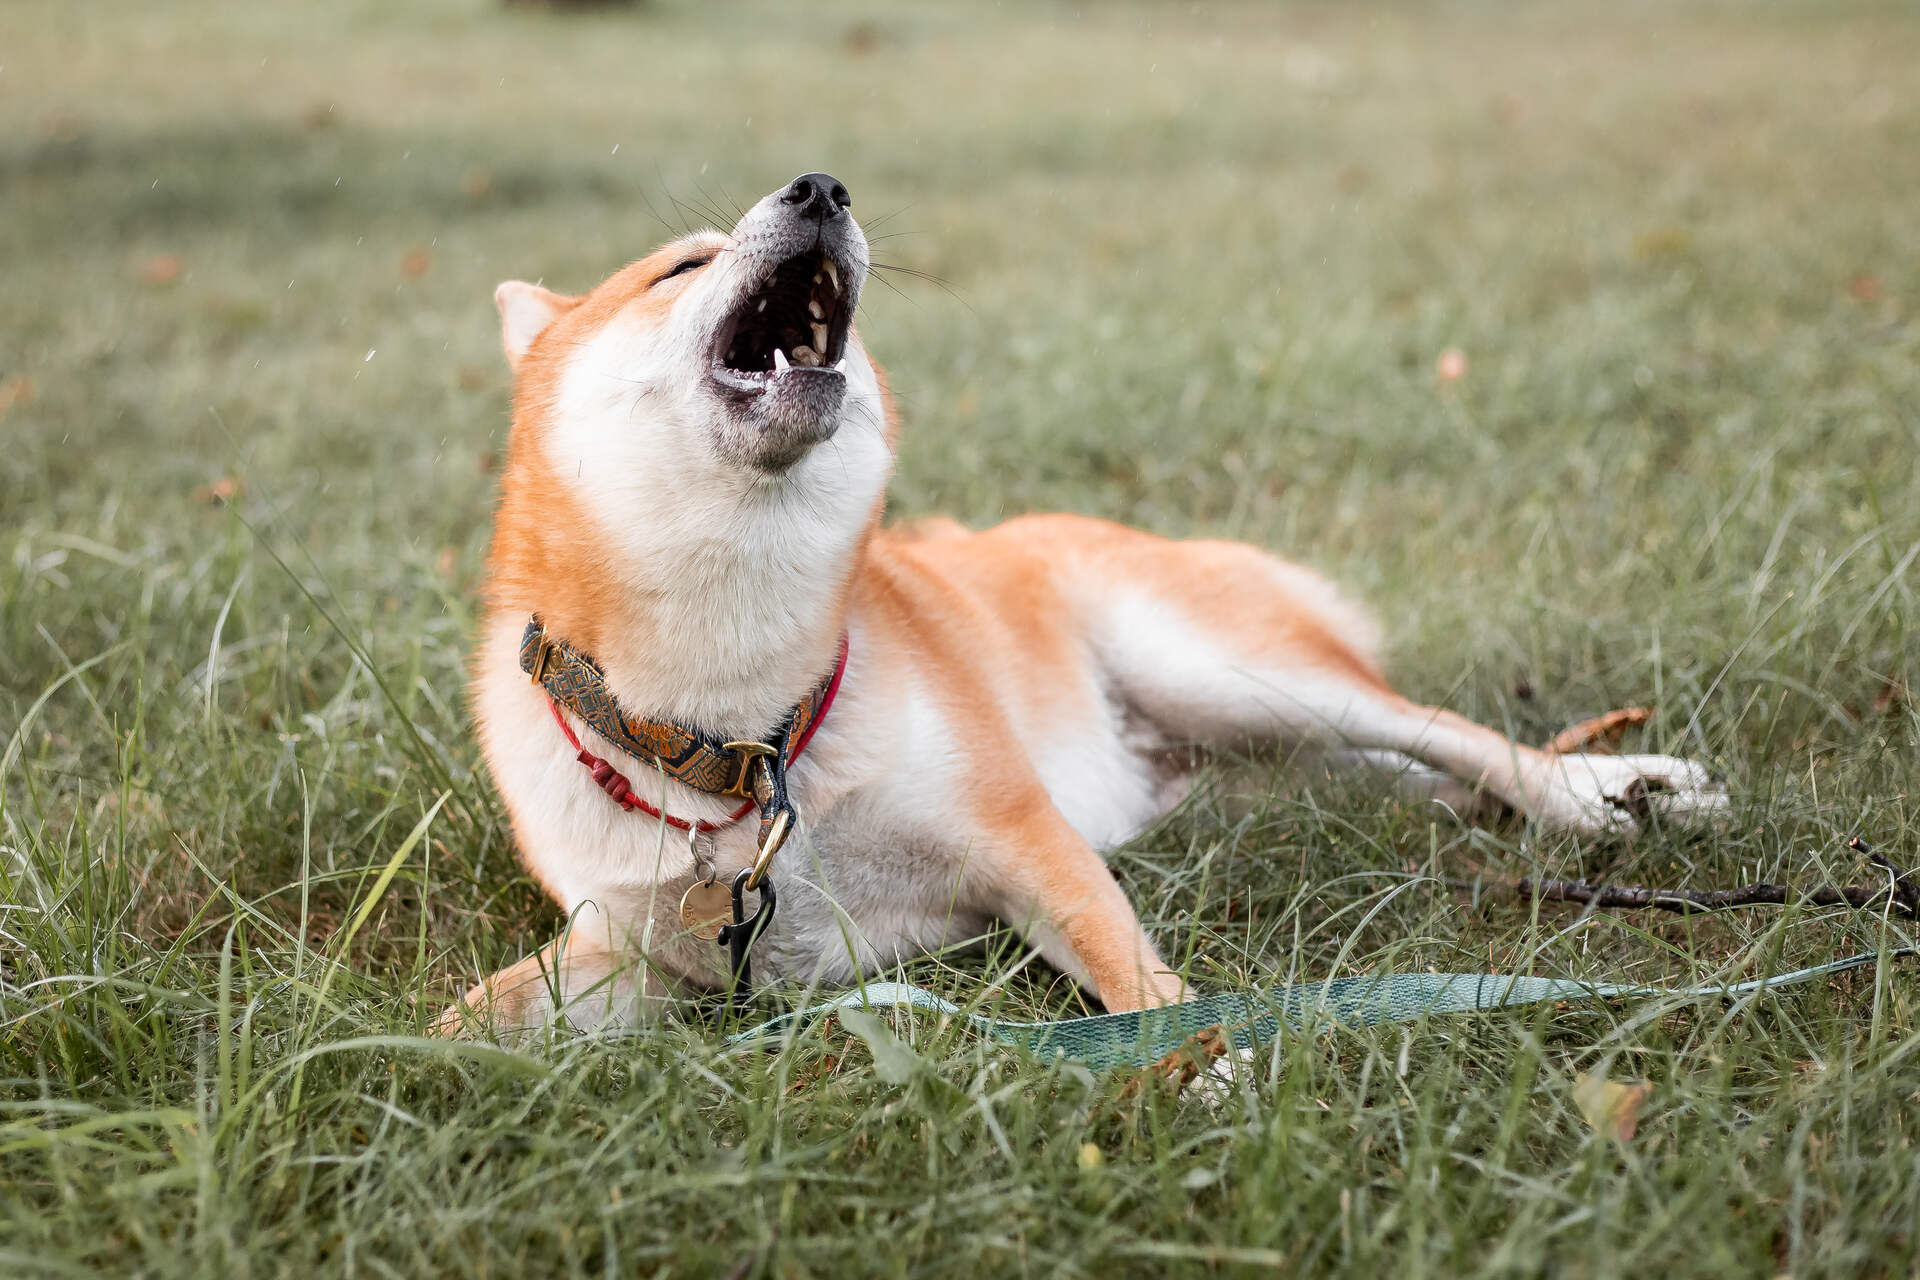 A dog coughing in the grass